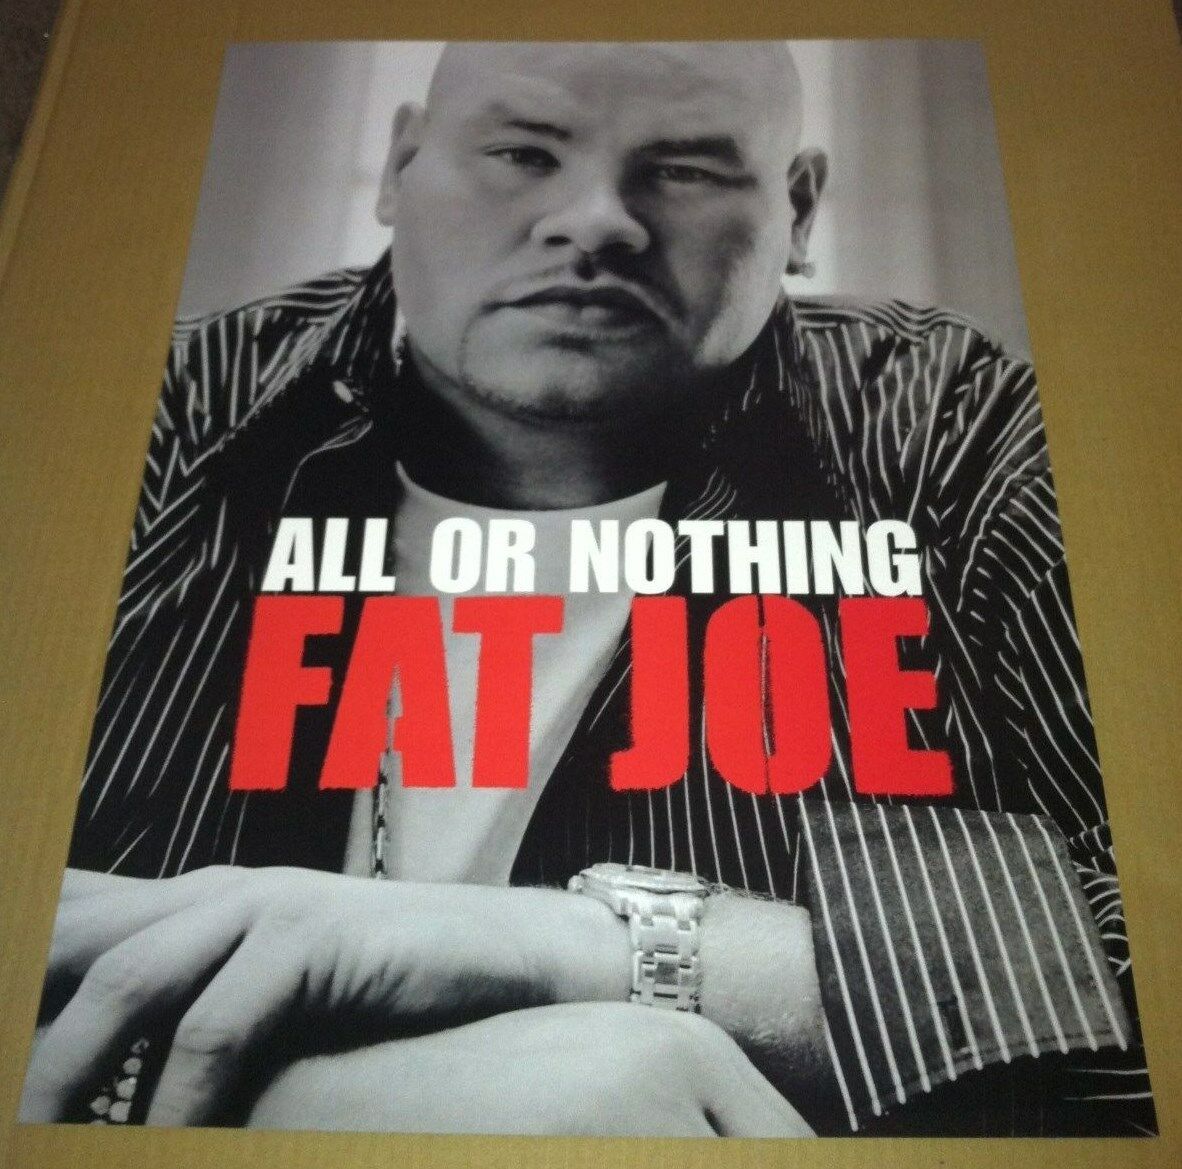 FAT JOE 2005 Double Sided PROMO POSTER for All Or Nothing CD USA 18x24 MINT